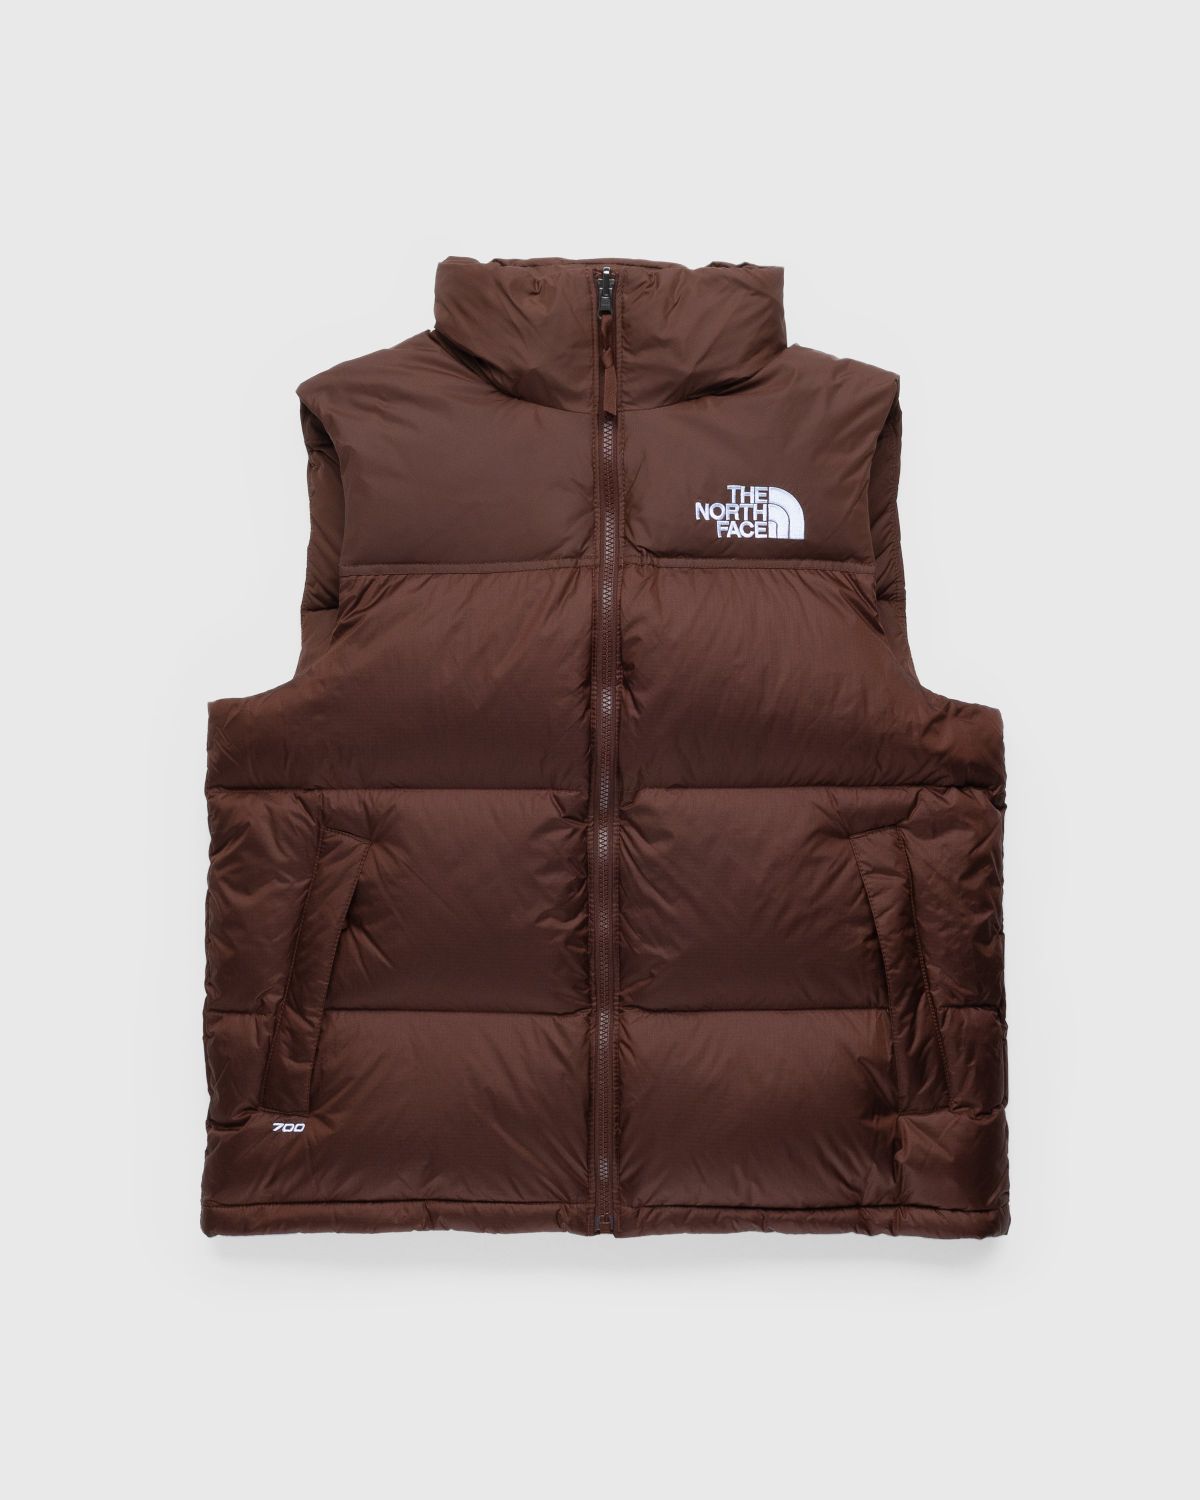 The North Face – Insulated Himalayan Vest Dark Oak